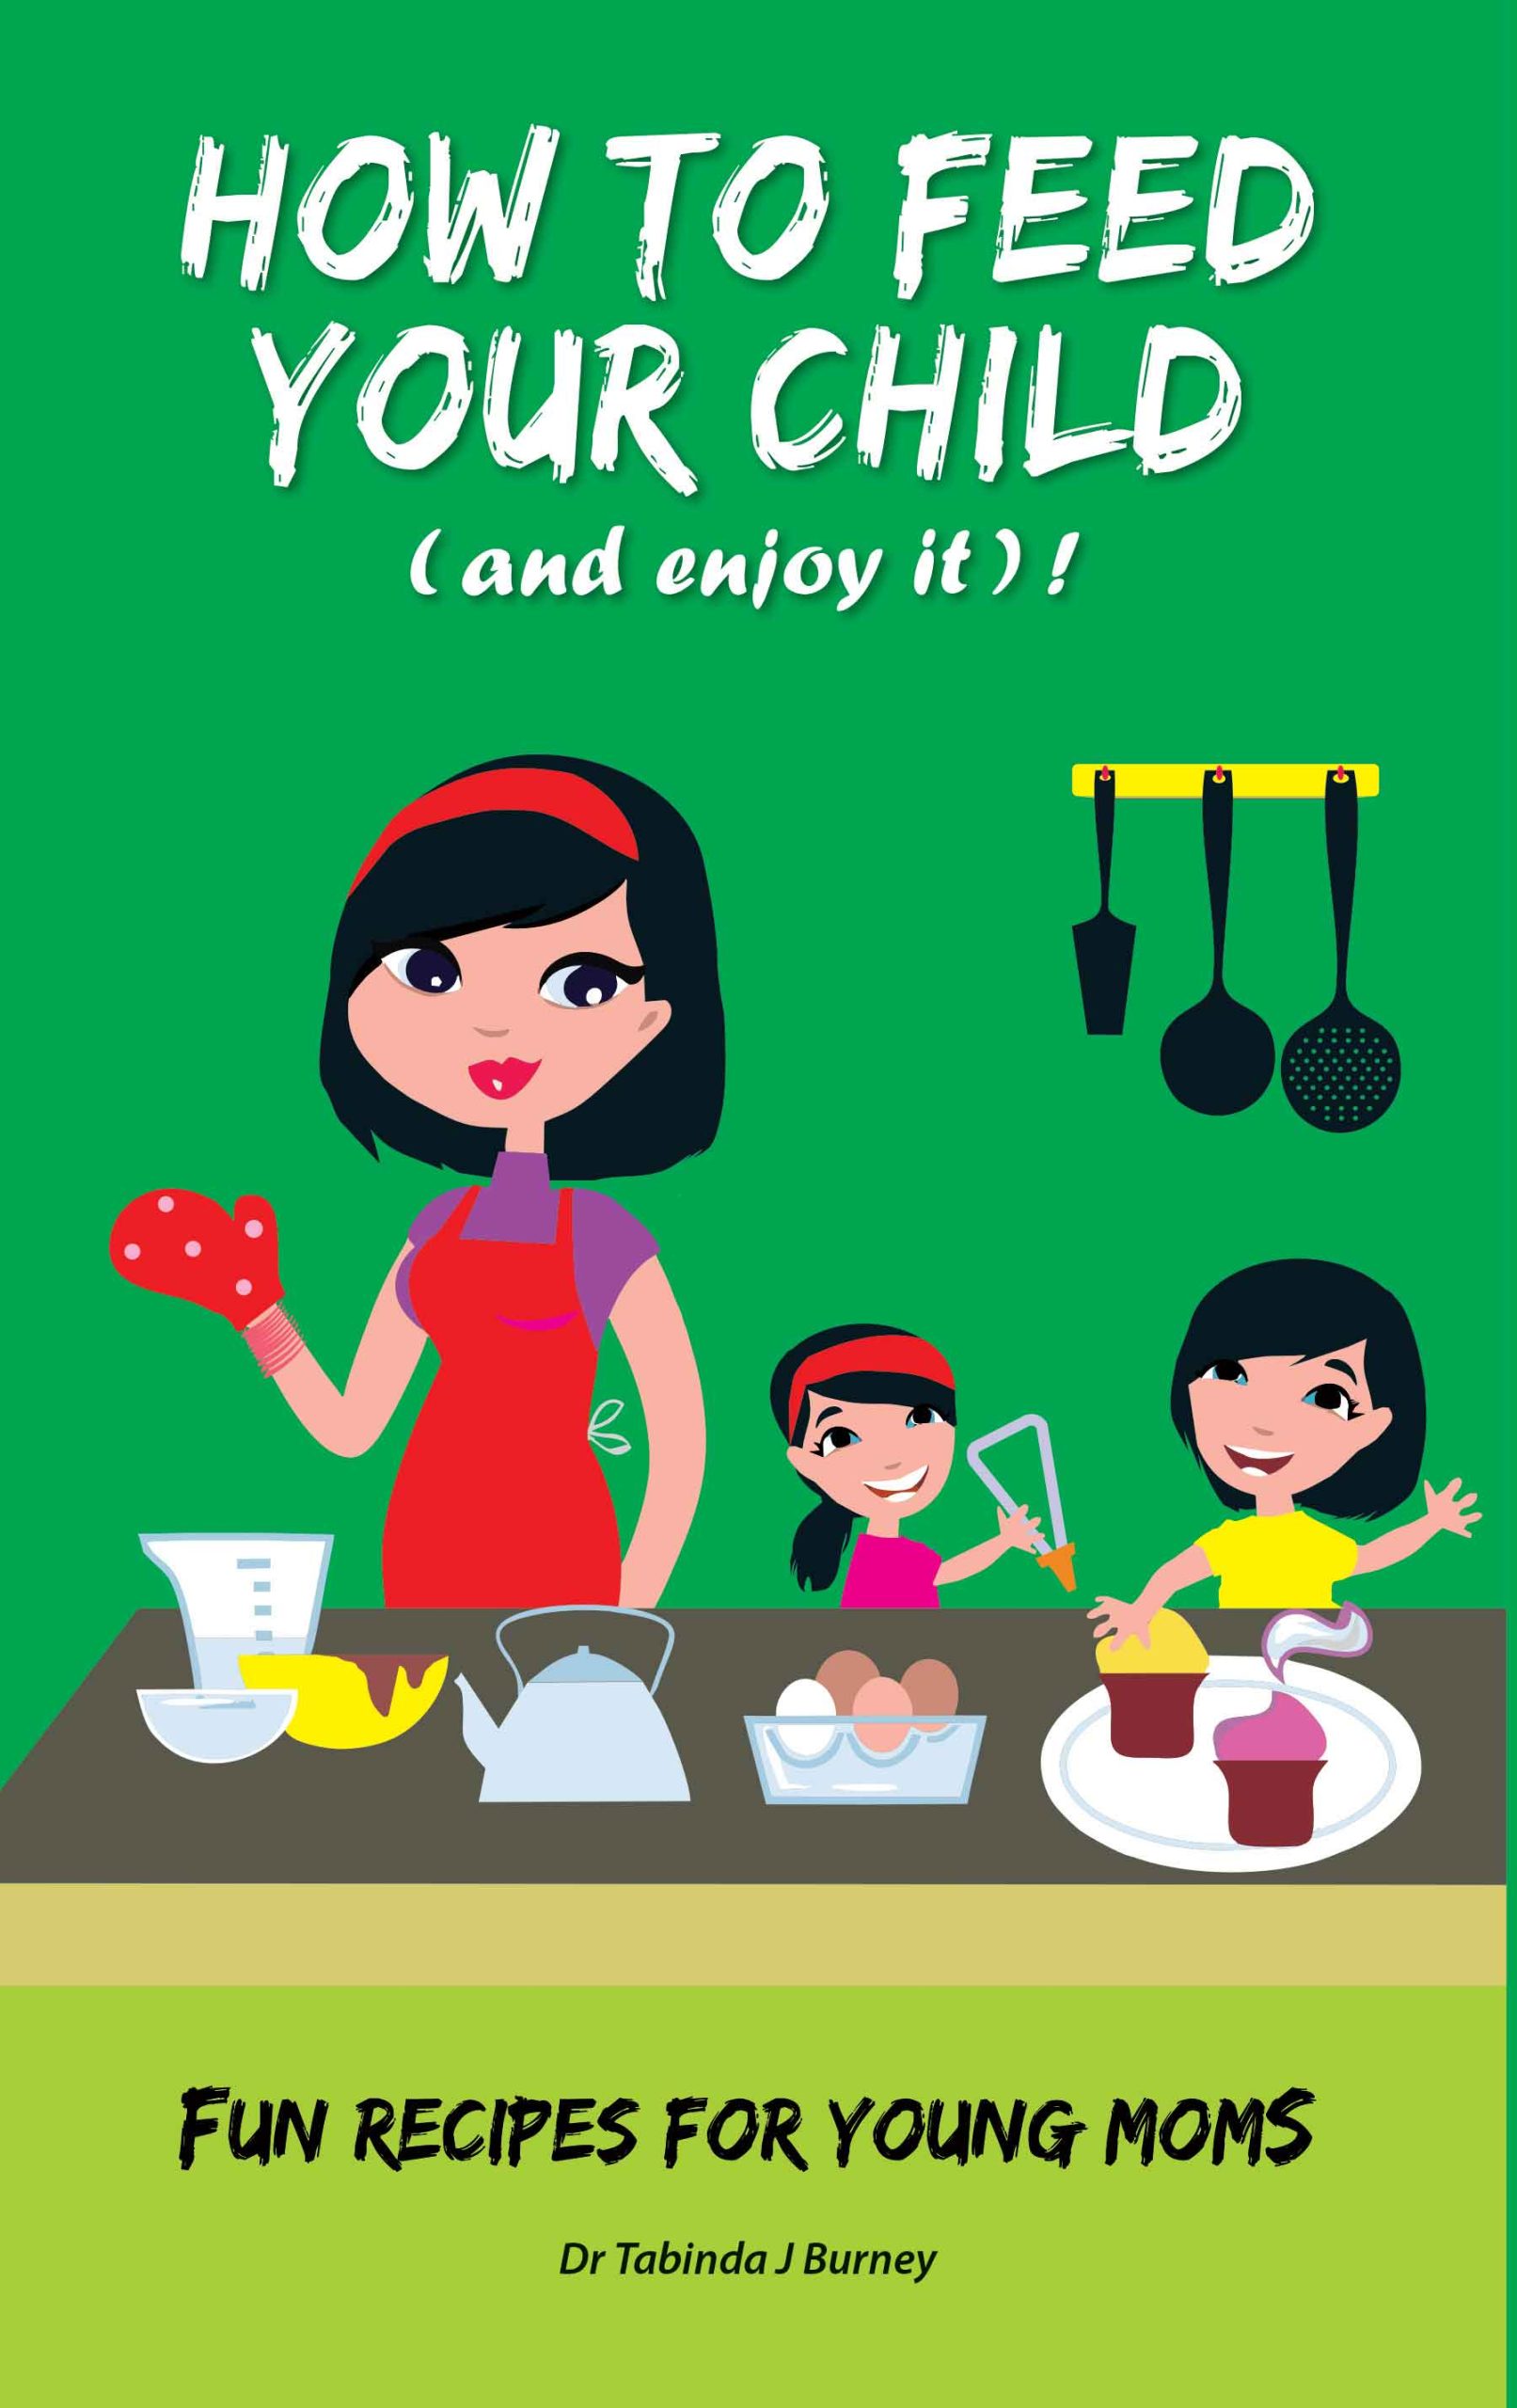 How to Feed Your Child and enjoy it Fun Recipes for Young Moms WEB scaled